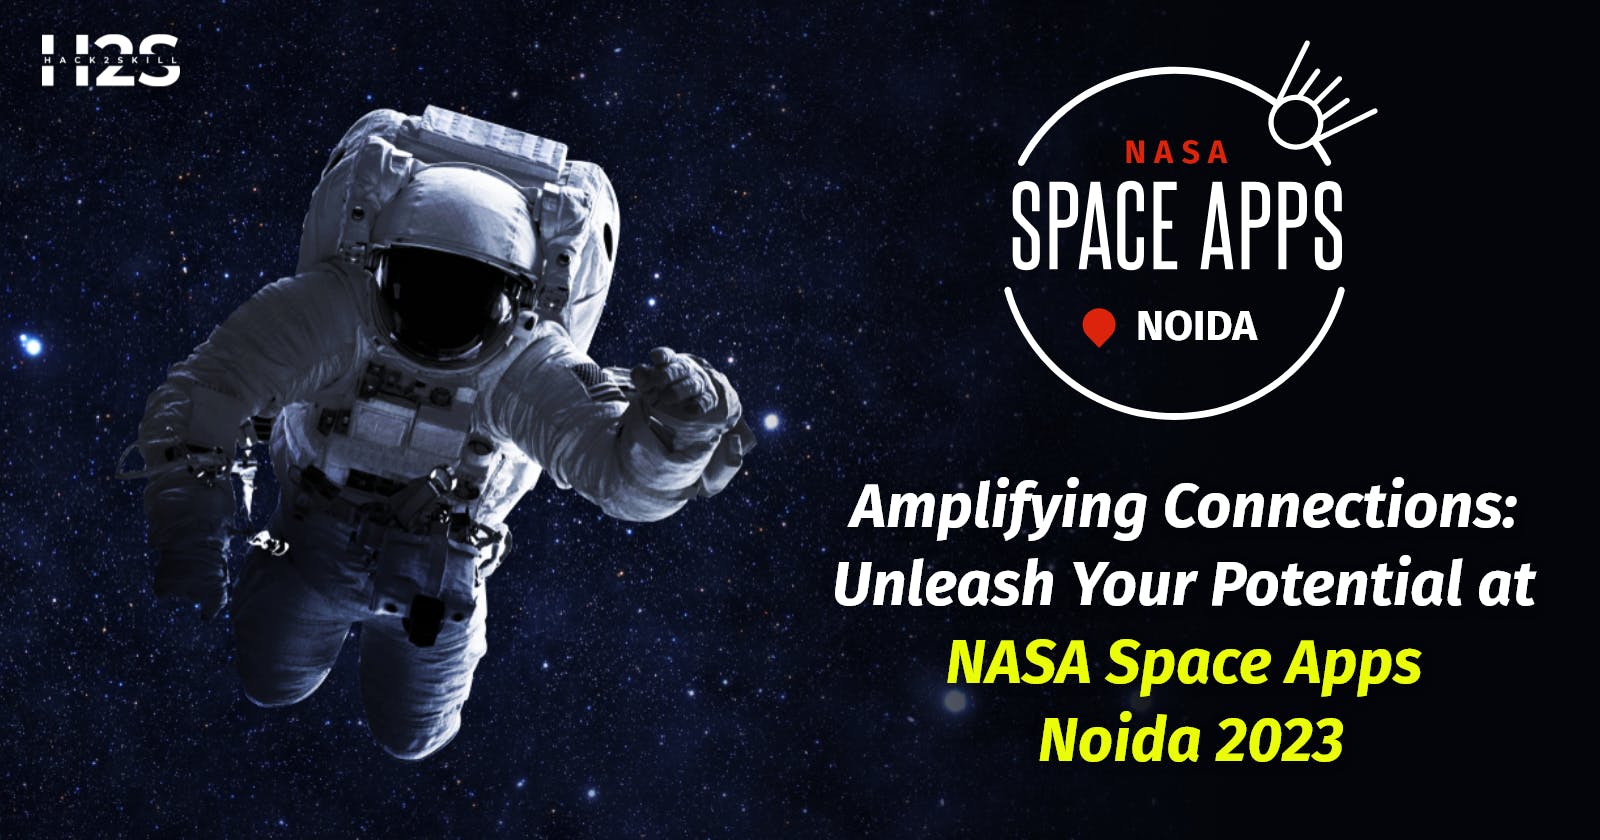 Amplifying Connections: Unleash Your Potential at NASA Space Apps Noida 2023